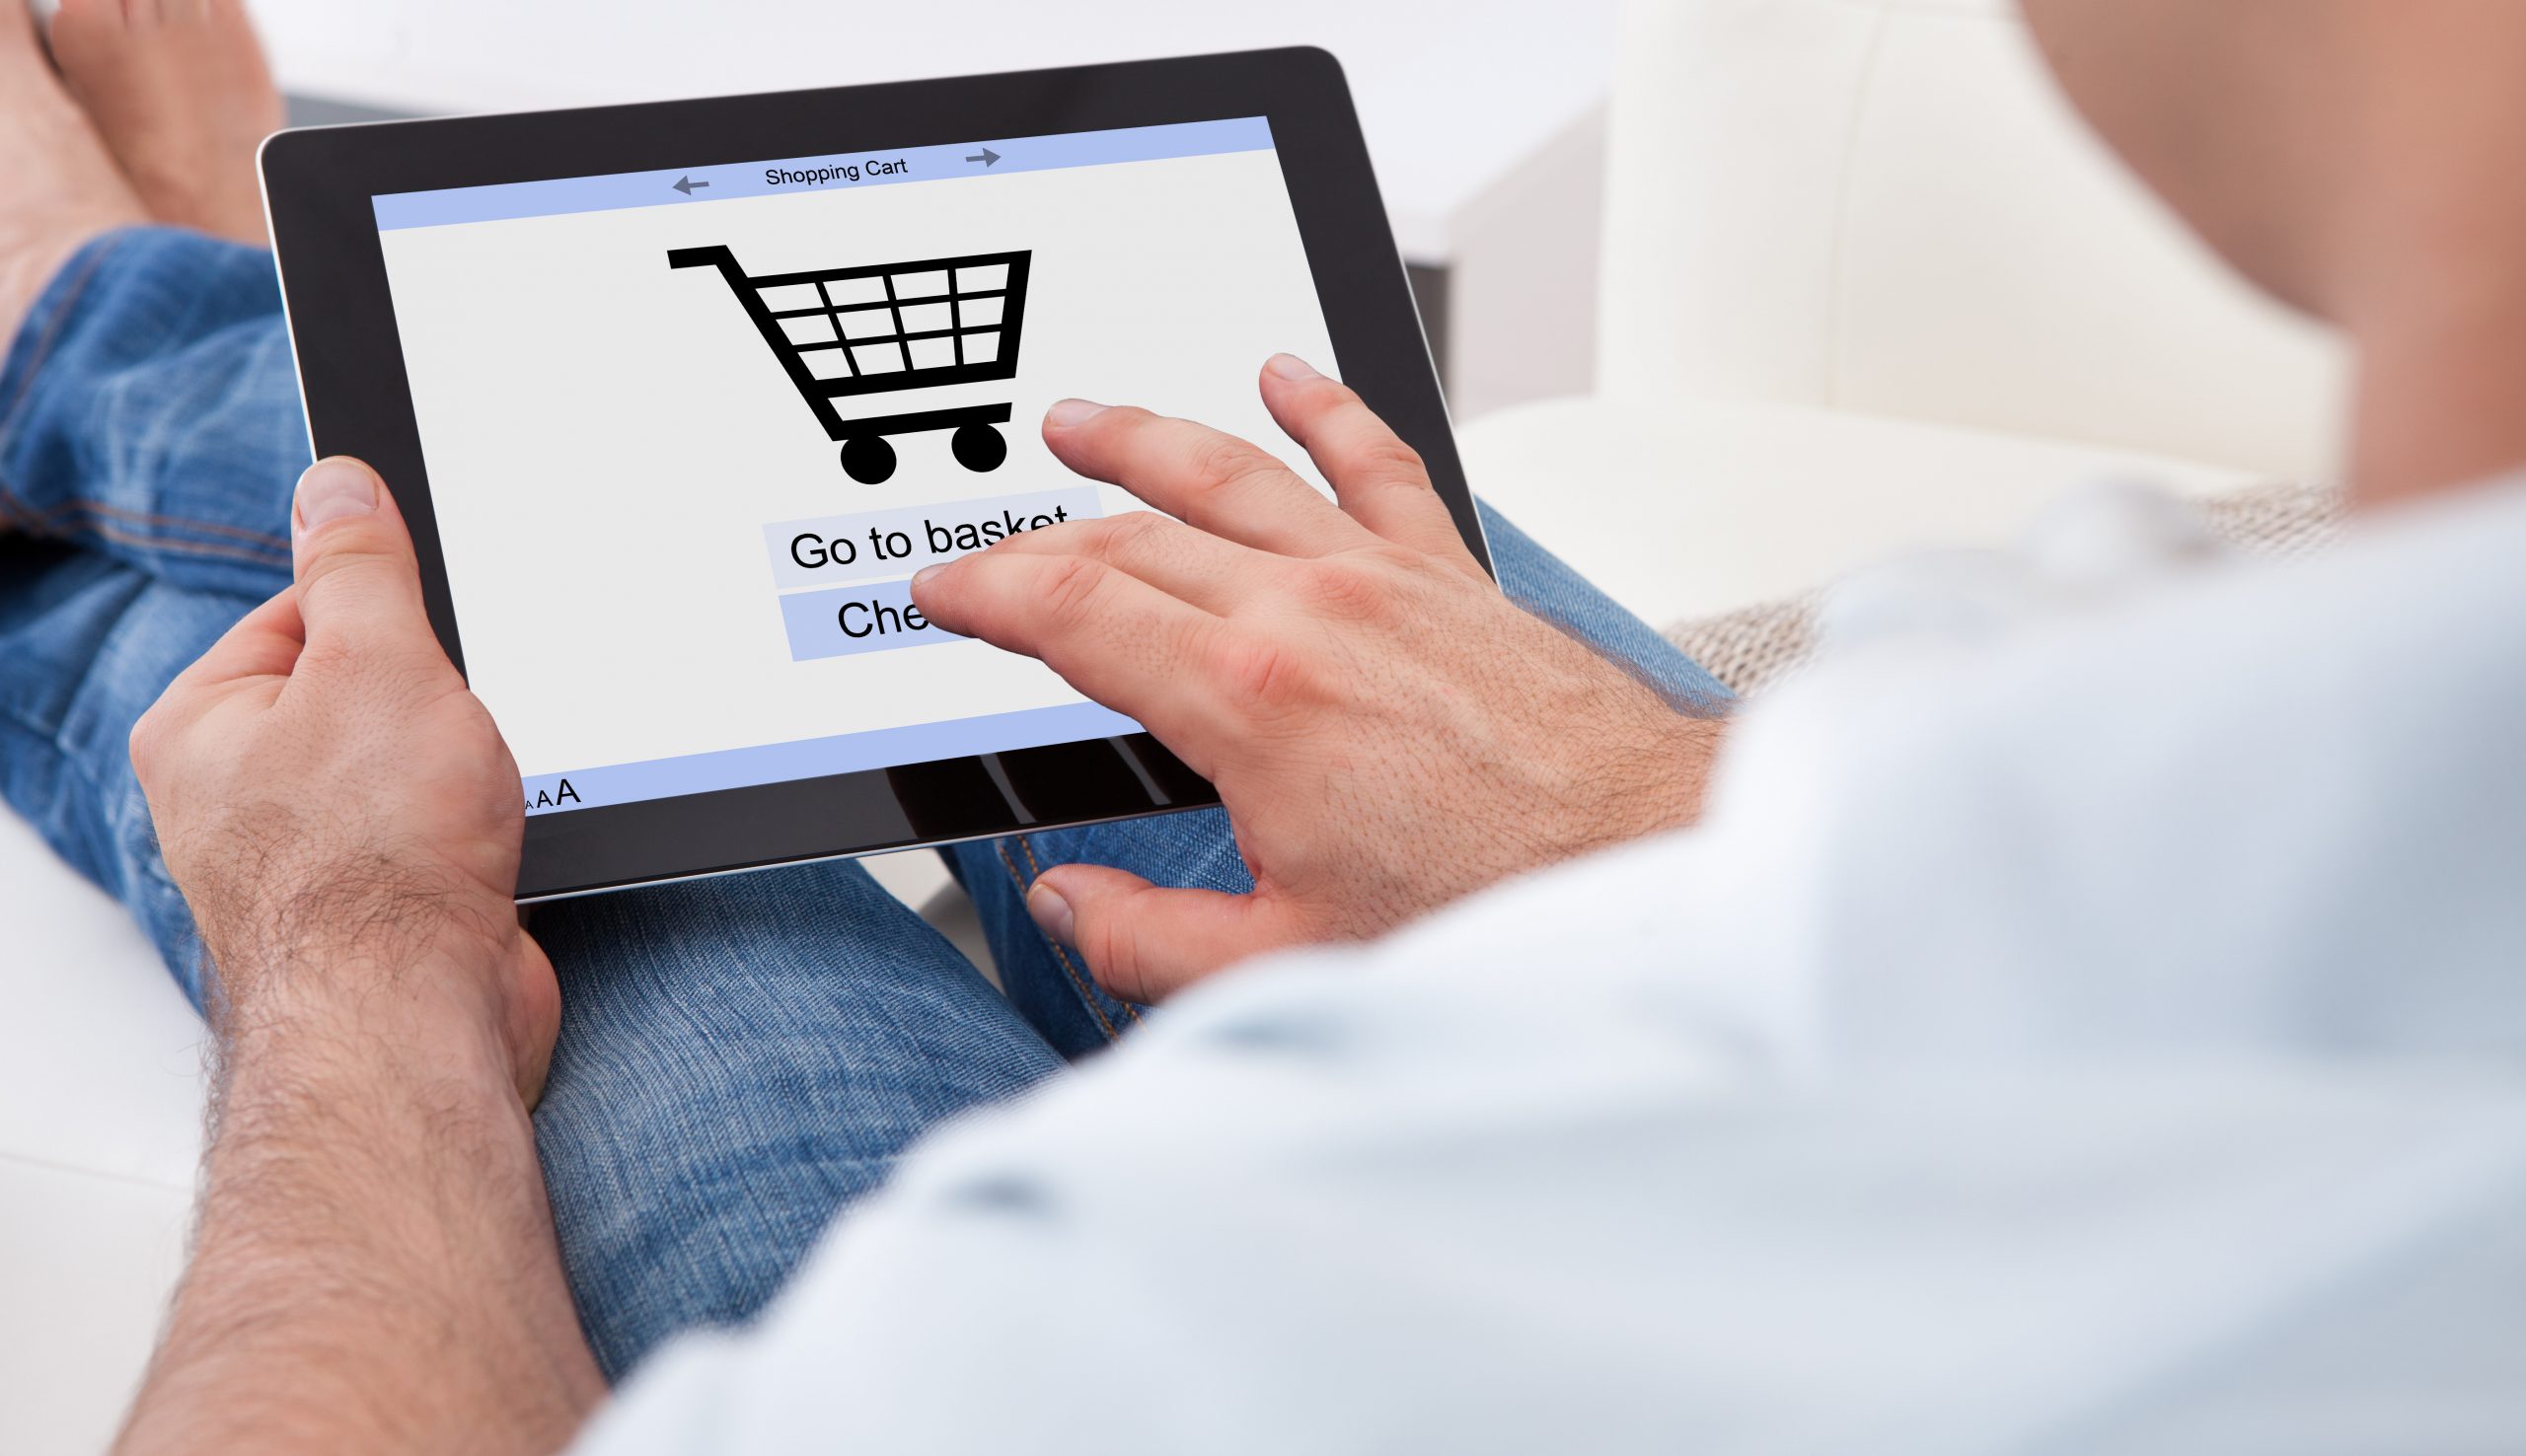 Web sees huge surge in overseas shoppers for UK retailers